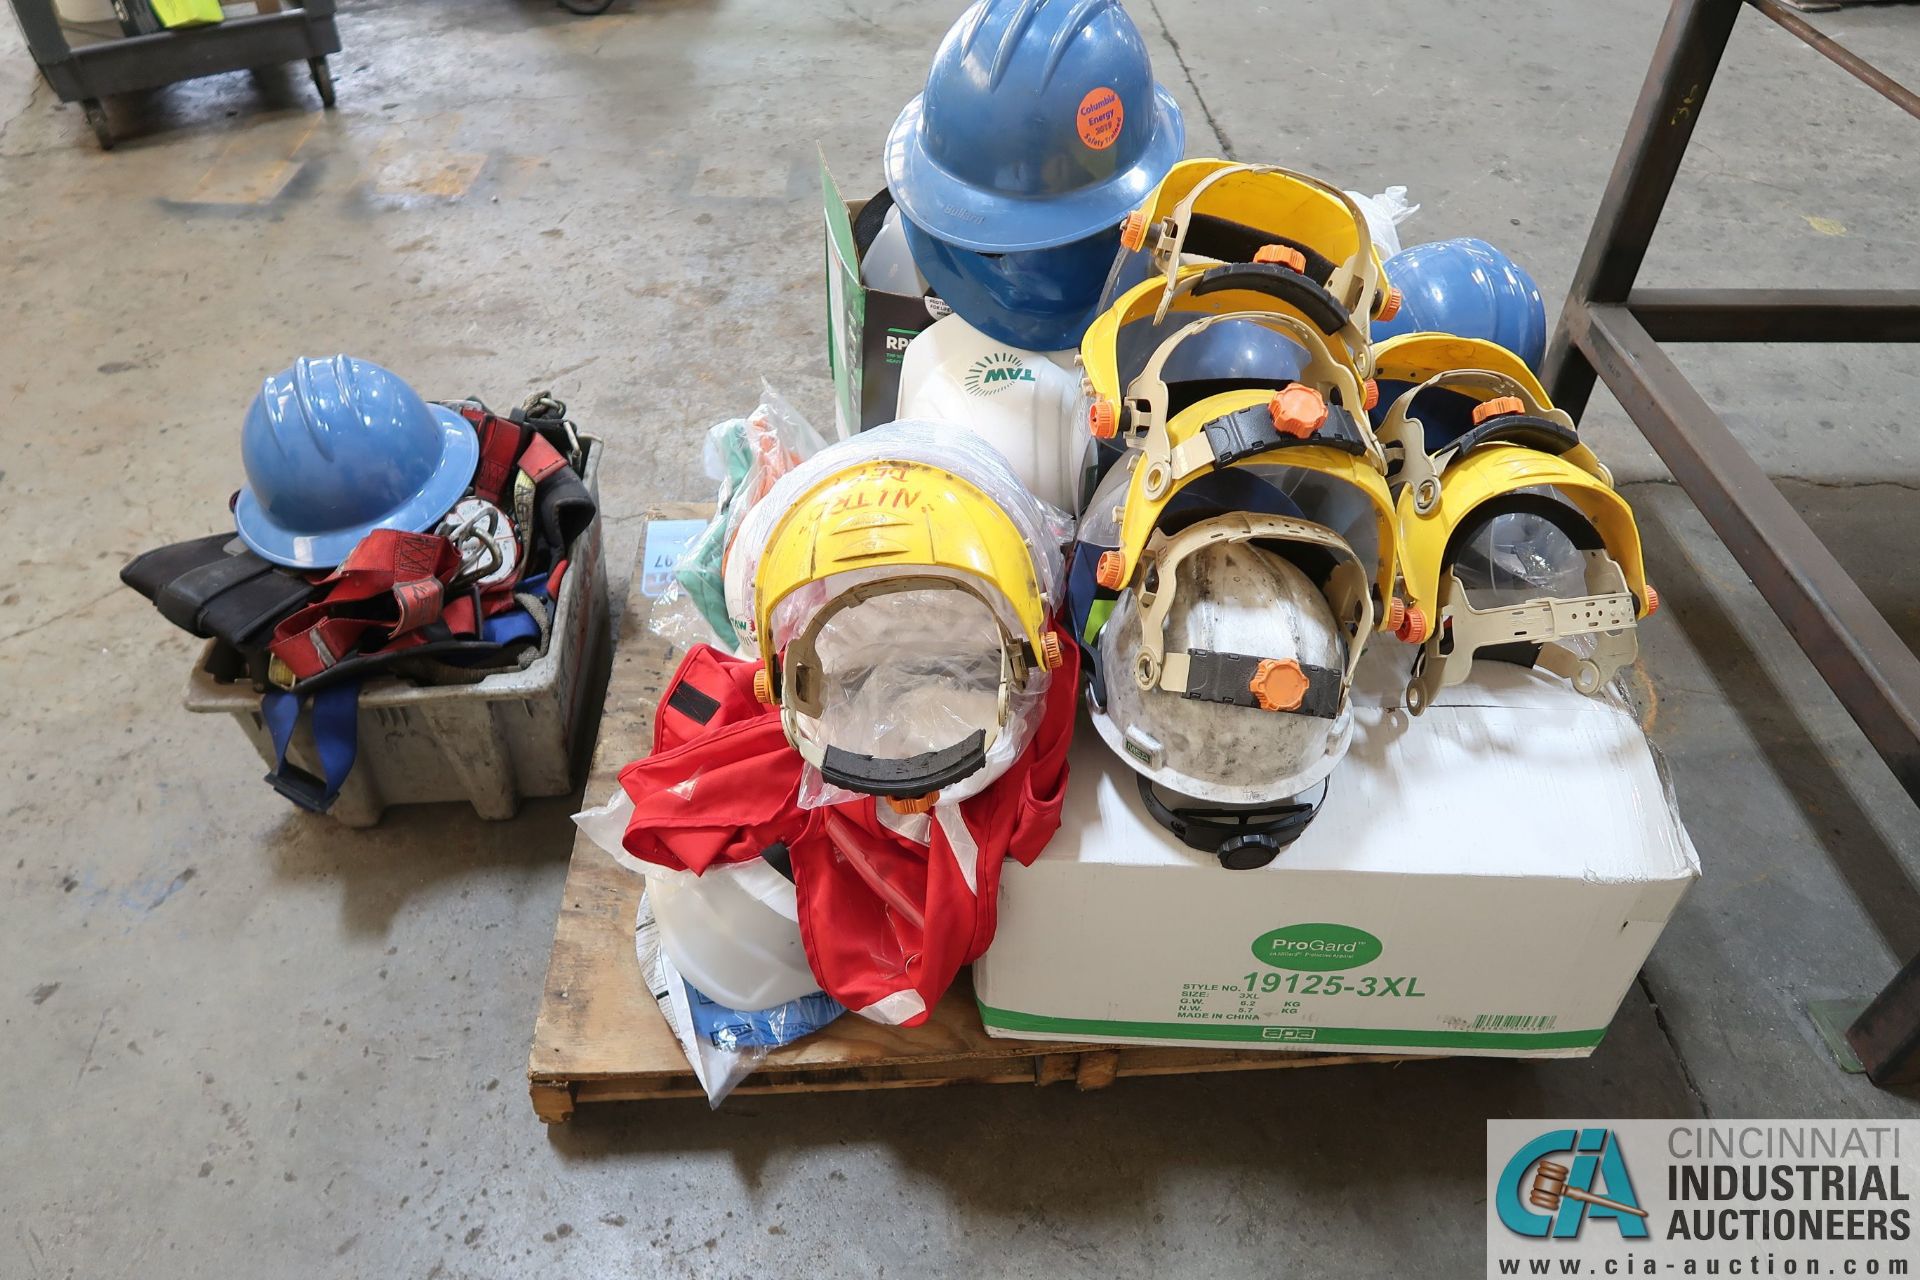 (LOT) MISCELLANEOUS SAFETY GEAR INCLUDING HELMETS, GLOVES, JACKETS, CLEAN SUITS, HARNESSES - Image 4 of 4